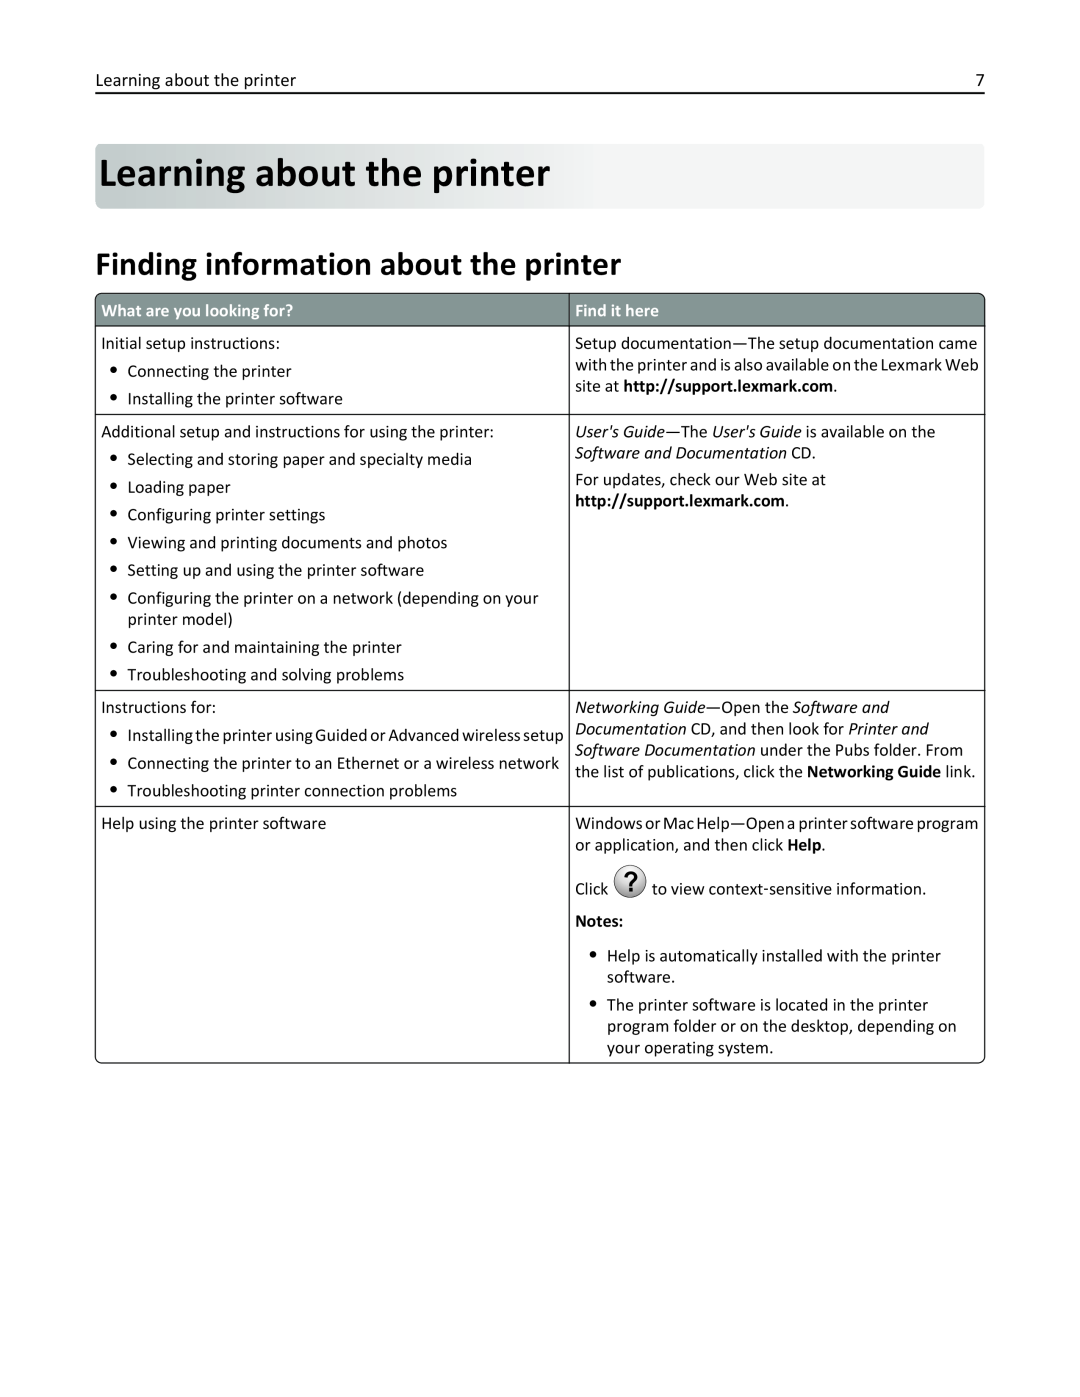 Lexmark 954DE, 952DE manual Learning about the printer, Finding information about the printer, Software and Documentation CD 